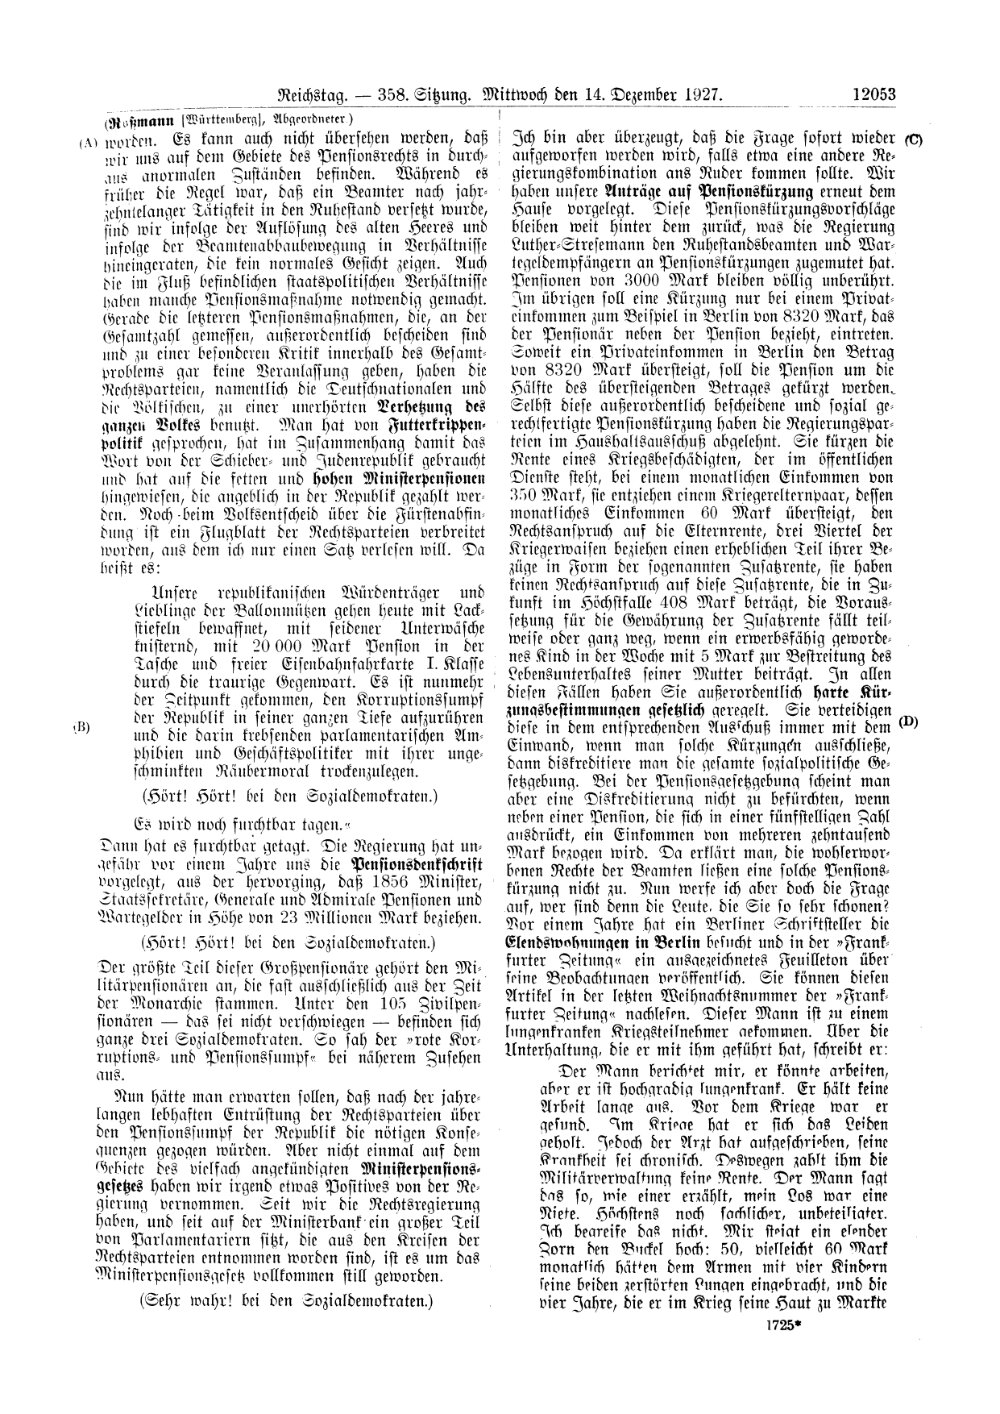 Scan of page 12053